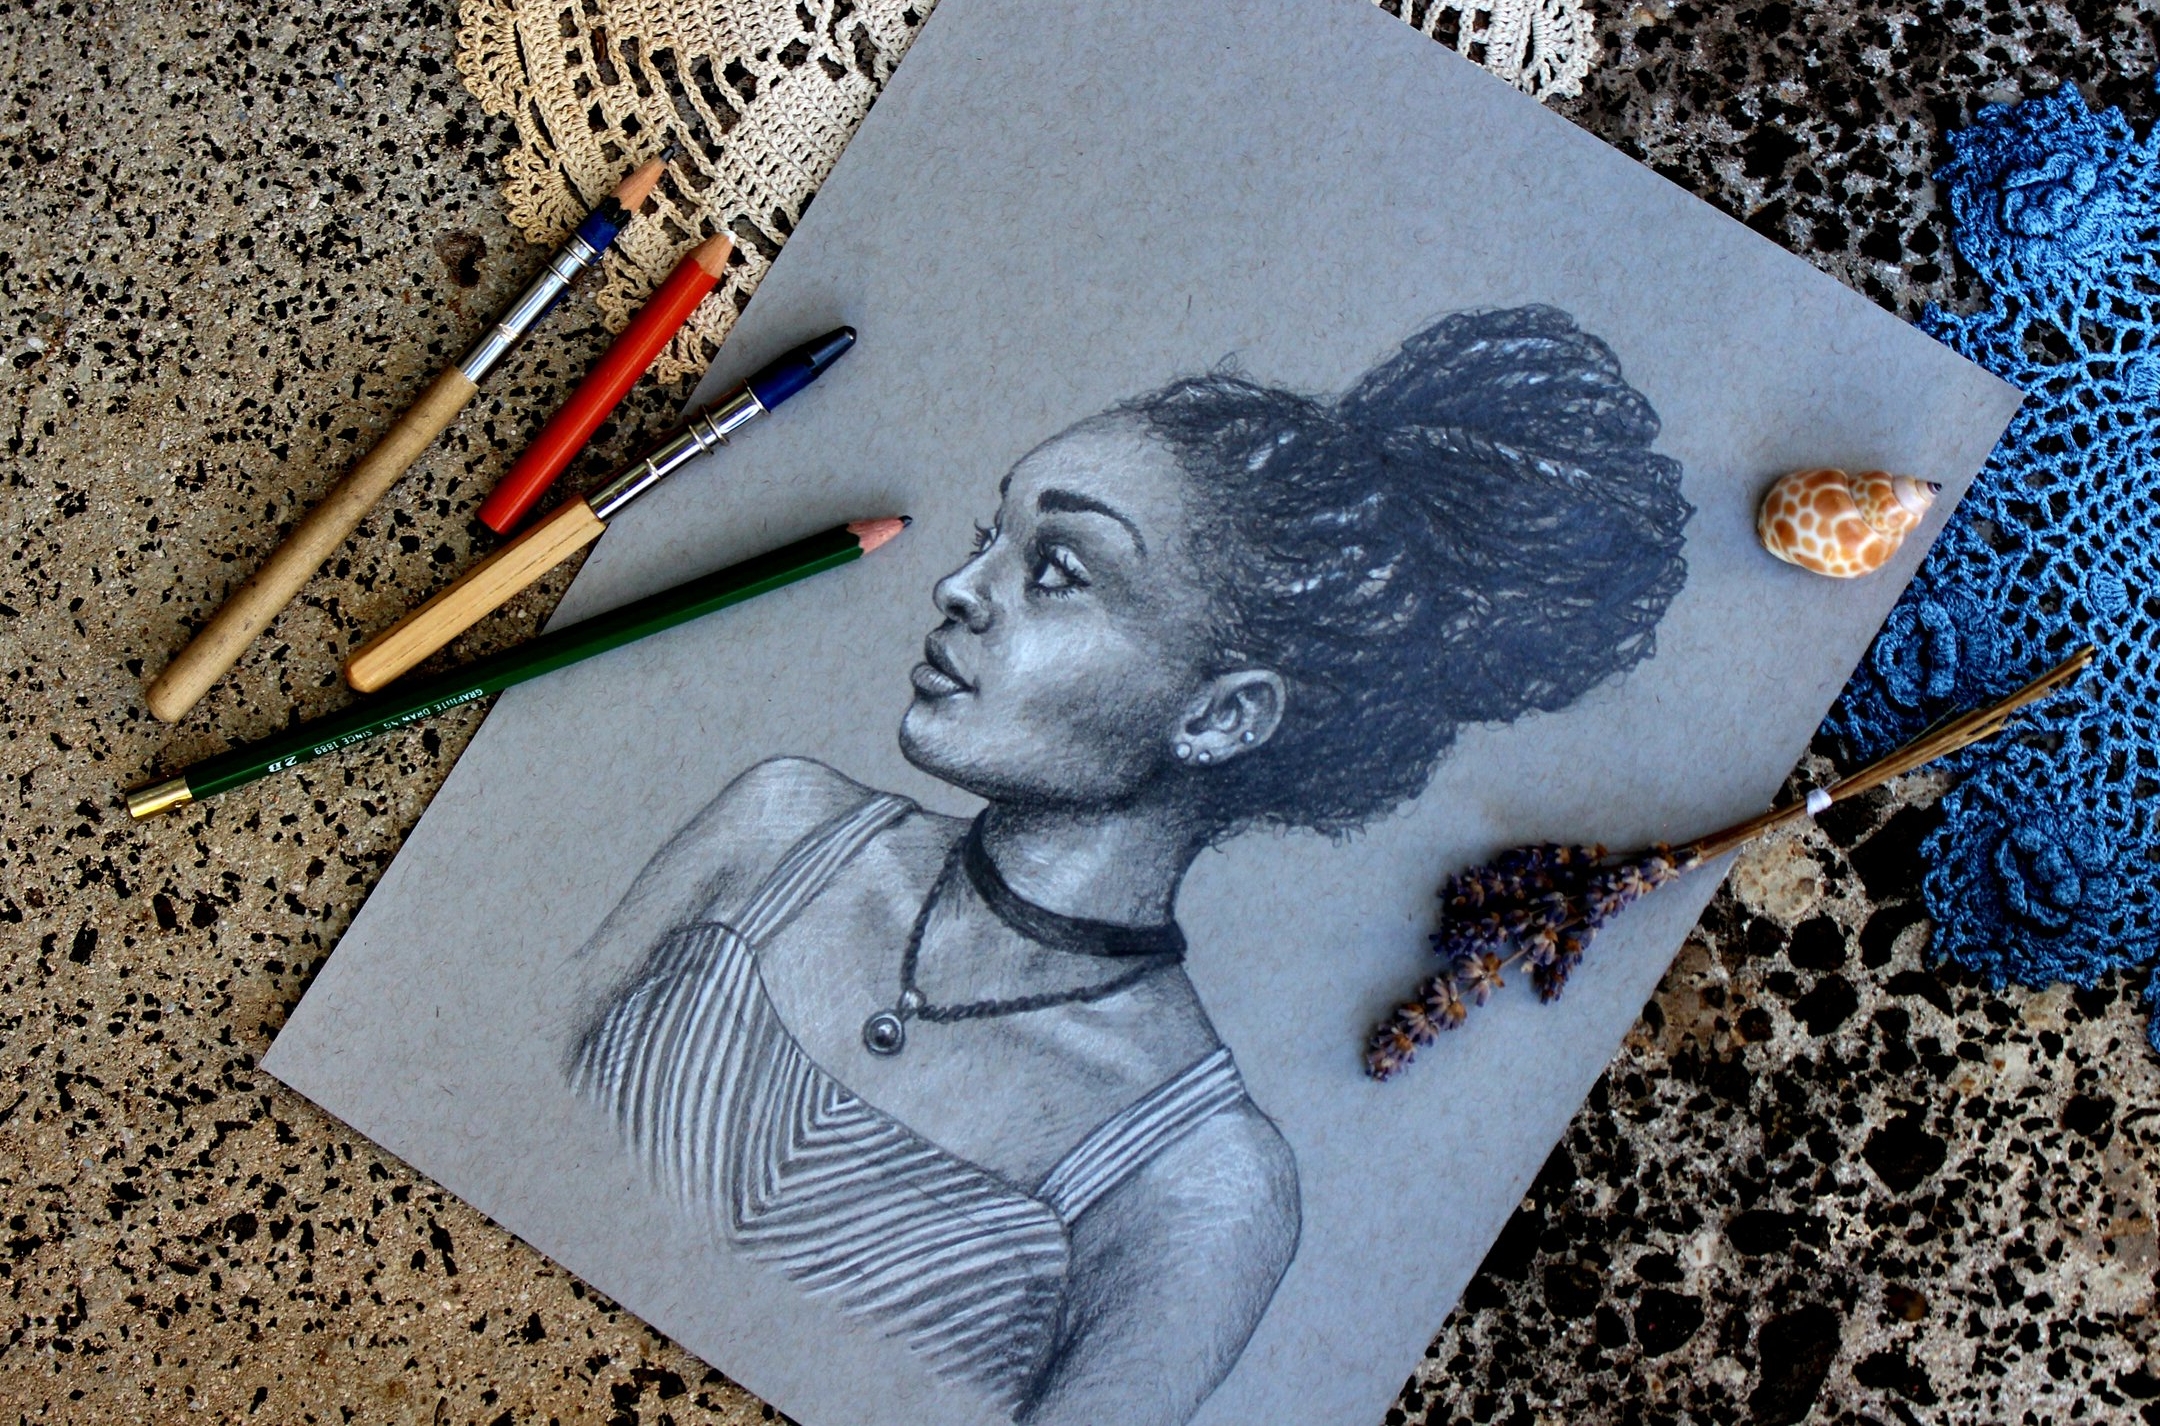 The Best Pencils for Portrait Drawing — Caleigh Bird Art